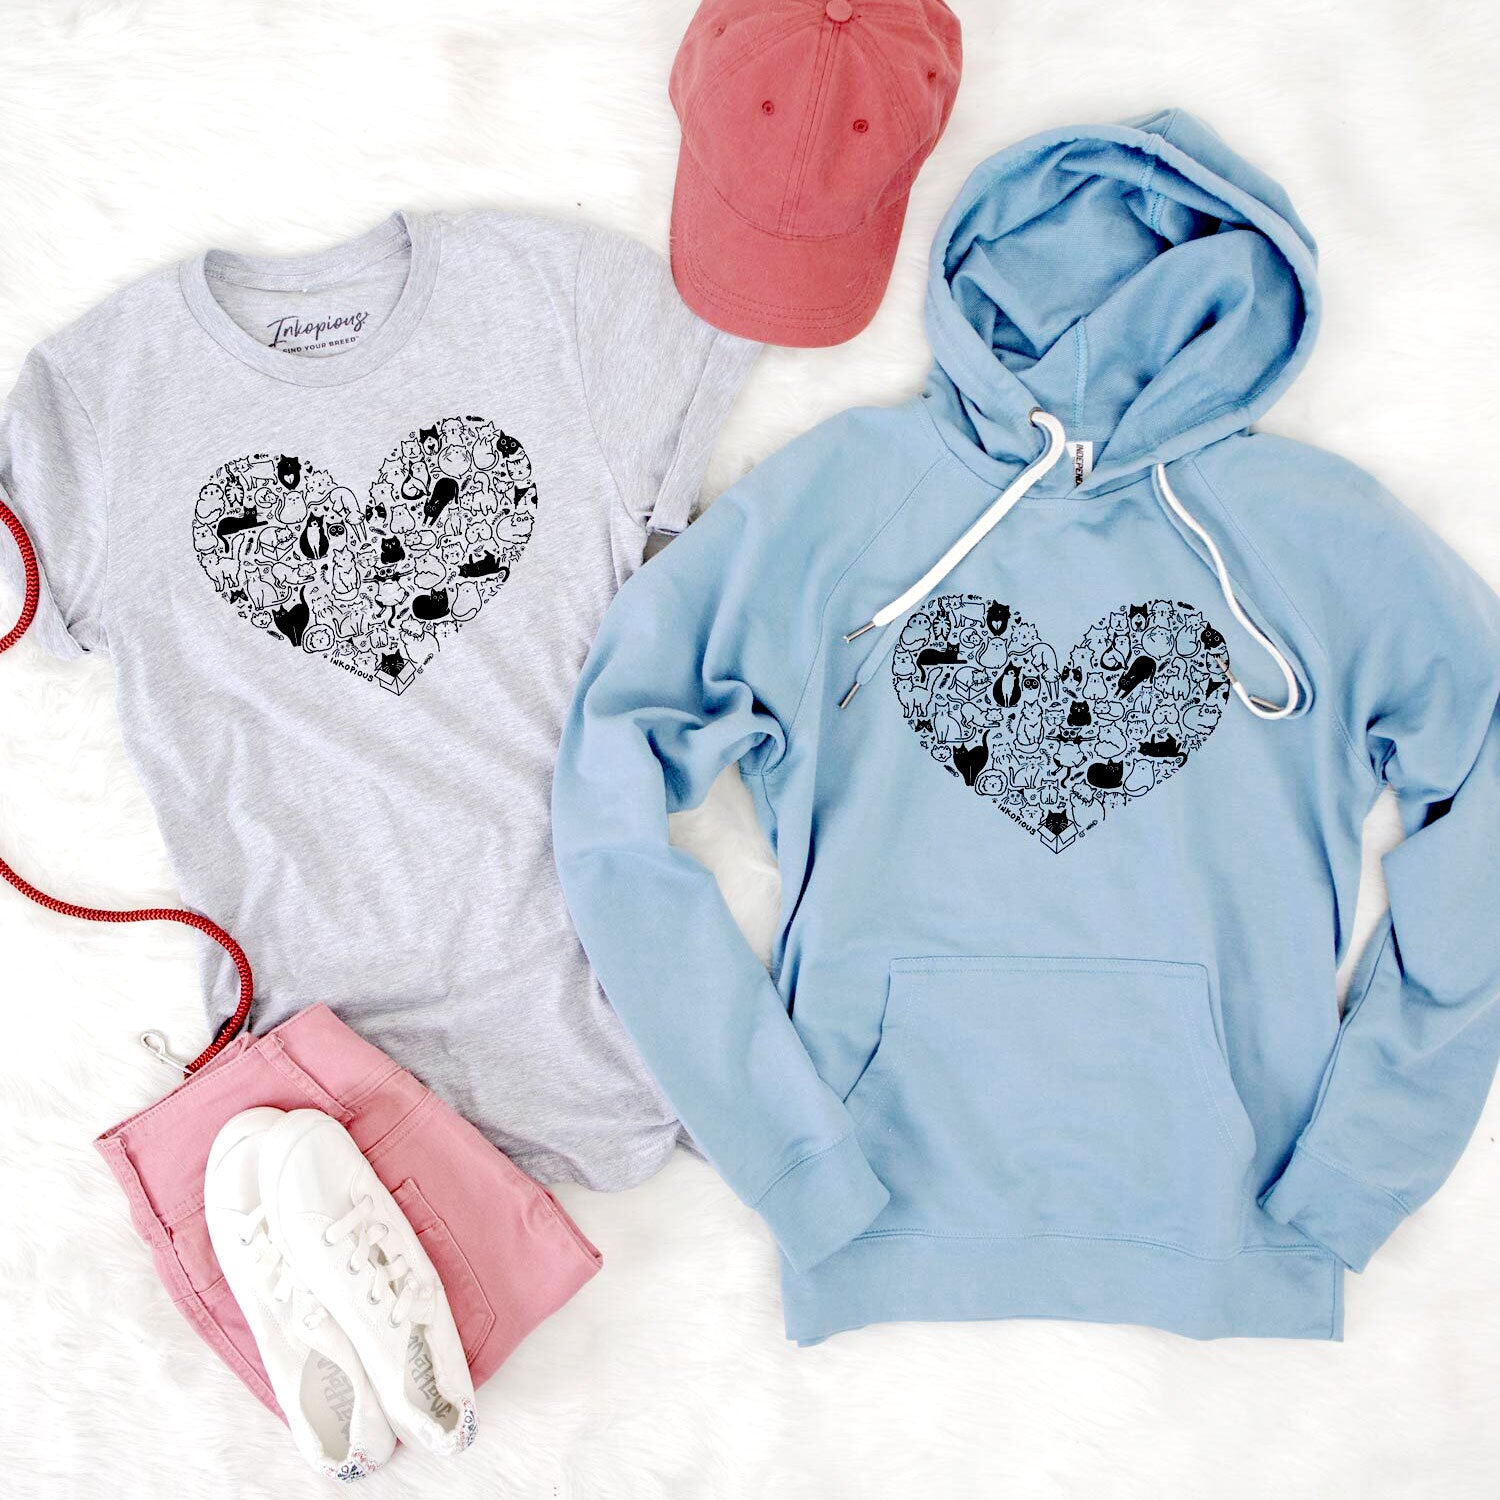 Heart Full of Cats shirts and hoodies